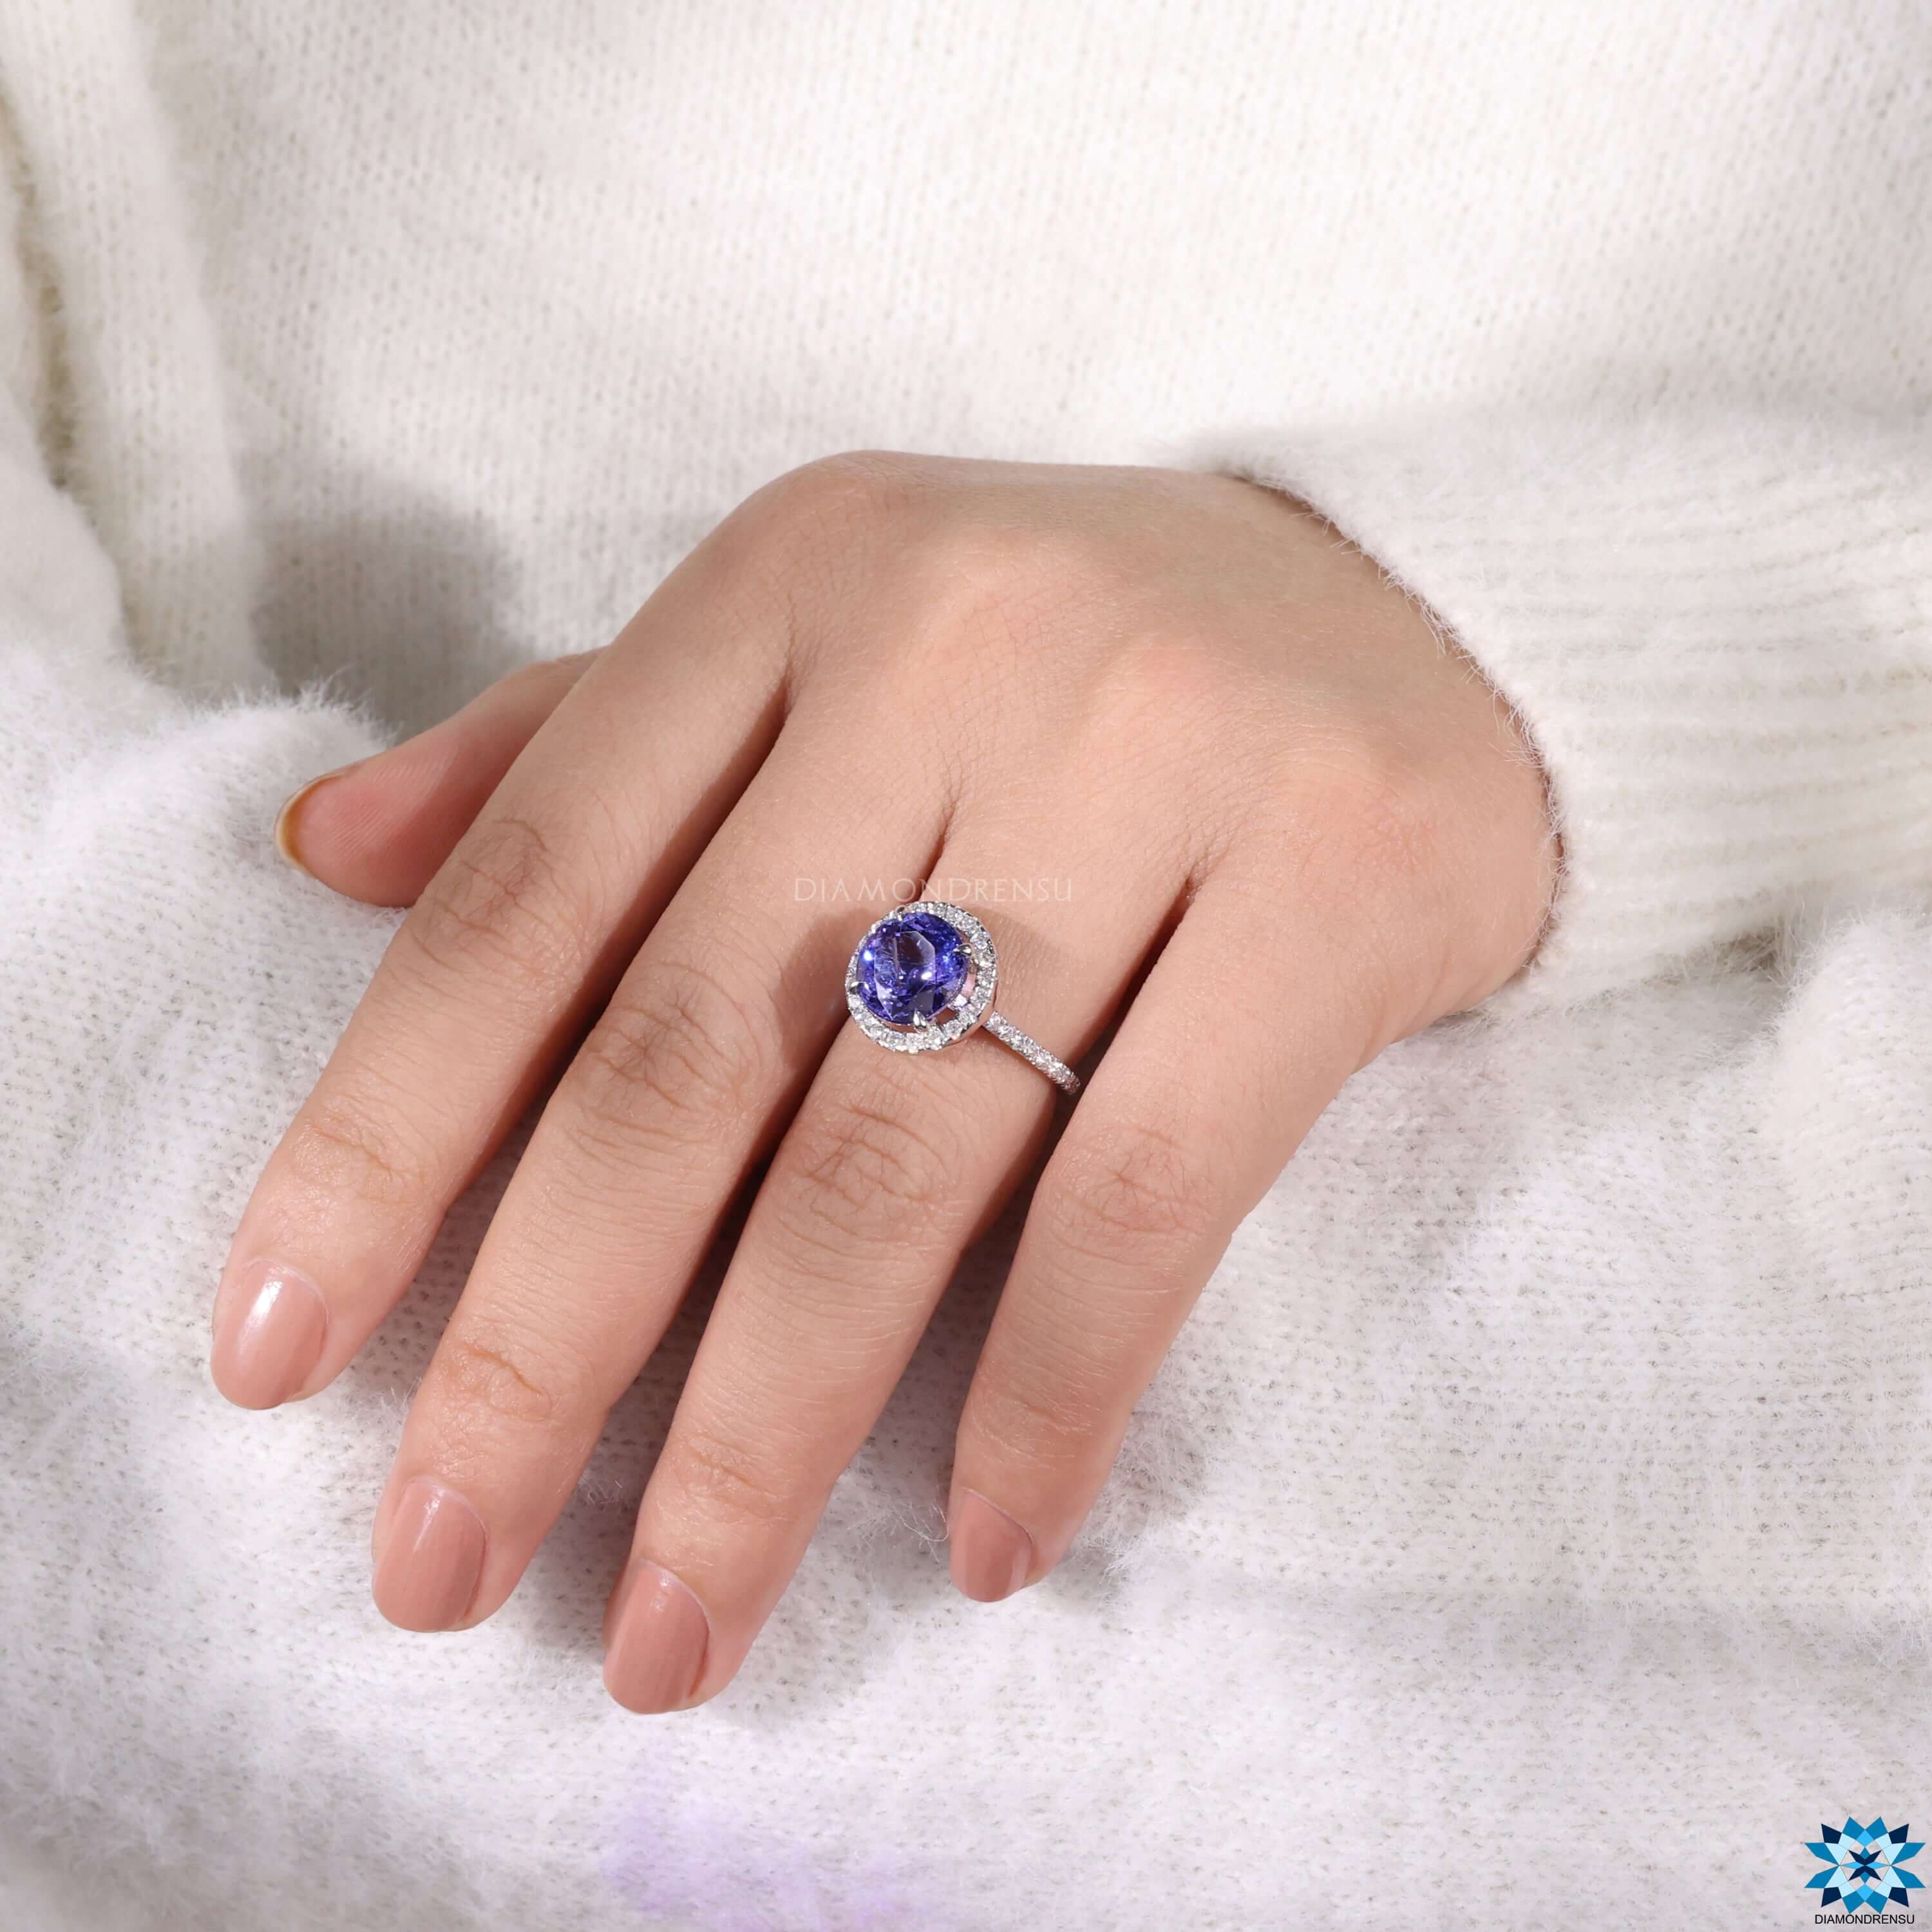 Vale Ring with Oval Tanzanite | 2.4 carats Oval Tanzanite Solitaire Ring in  14k White Gold | Diamondere